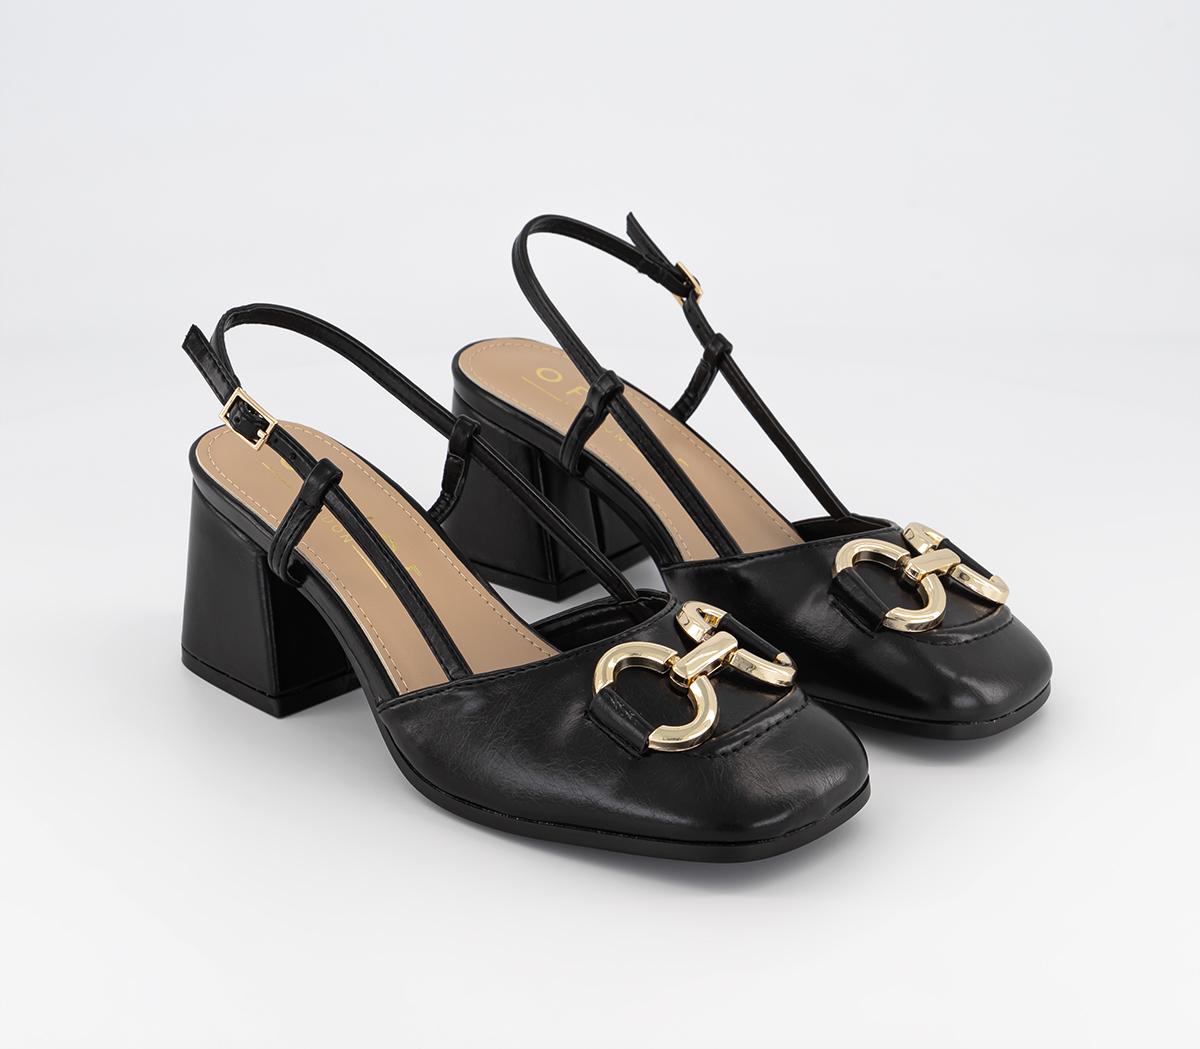 OFFICE Meredith Snaffle Trim Sling Courts Black - Mid Heels